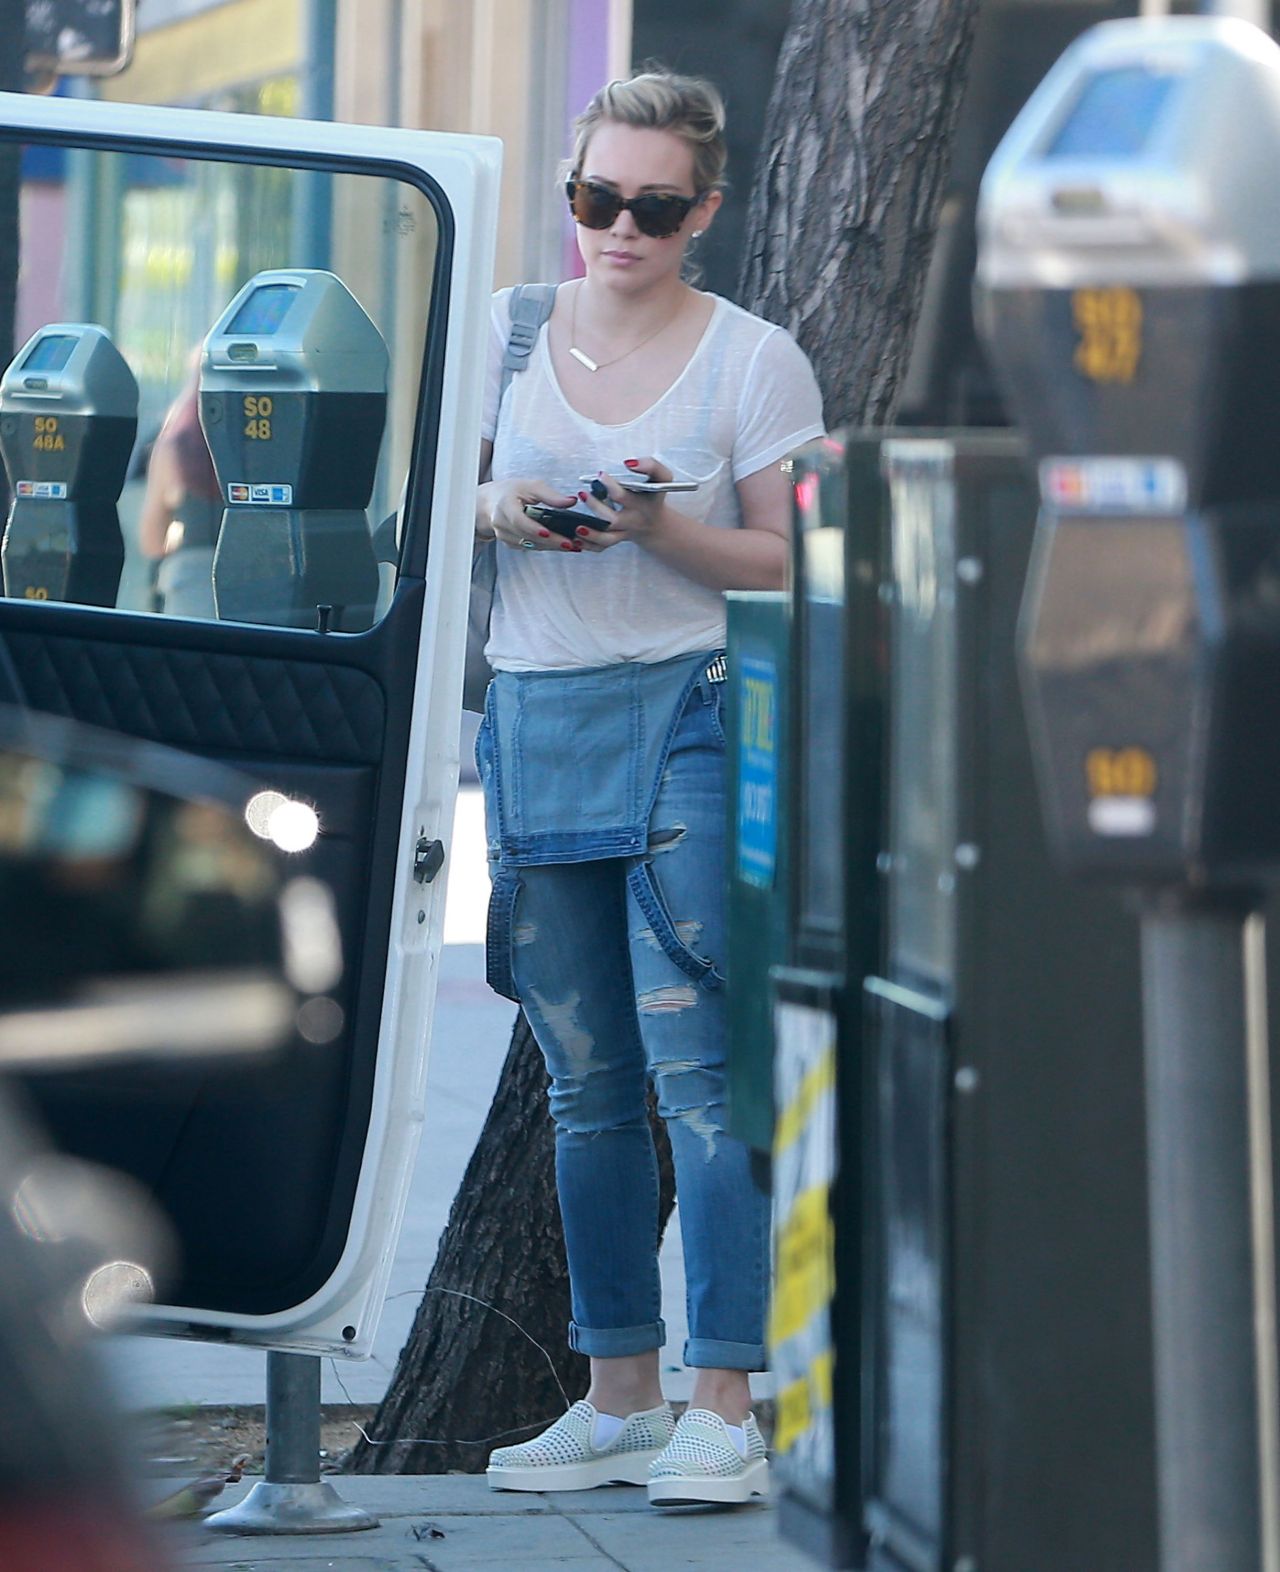 Hilary Duff Out in Los Angeles April 6, 2013 – Star Style